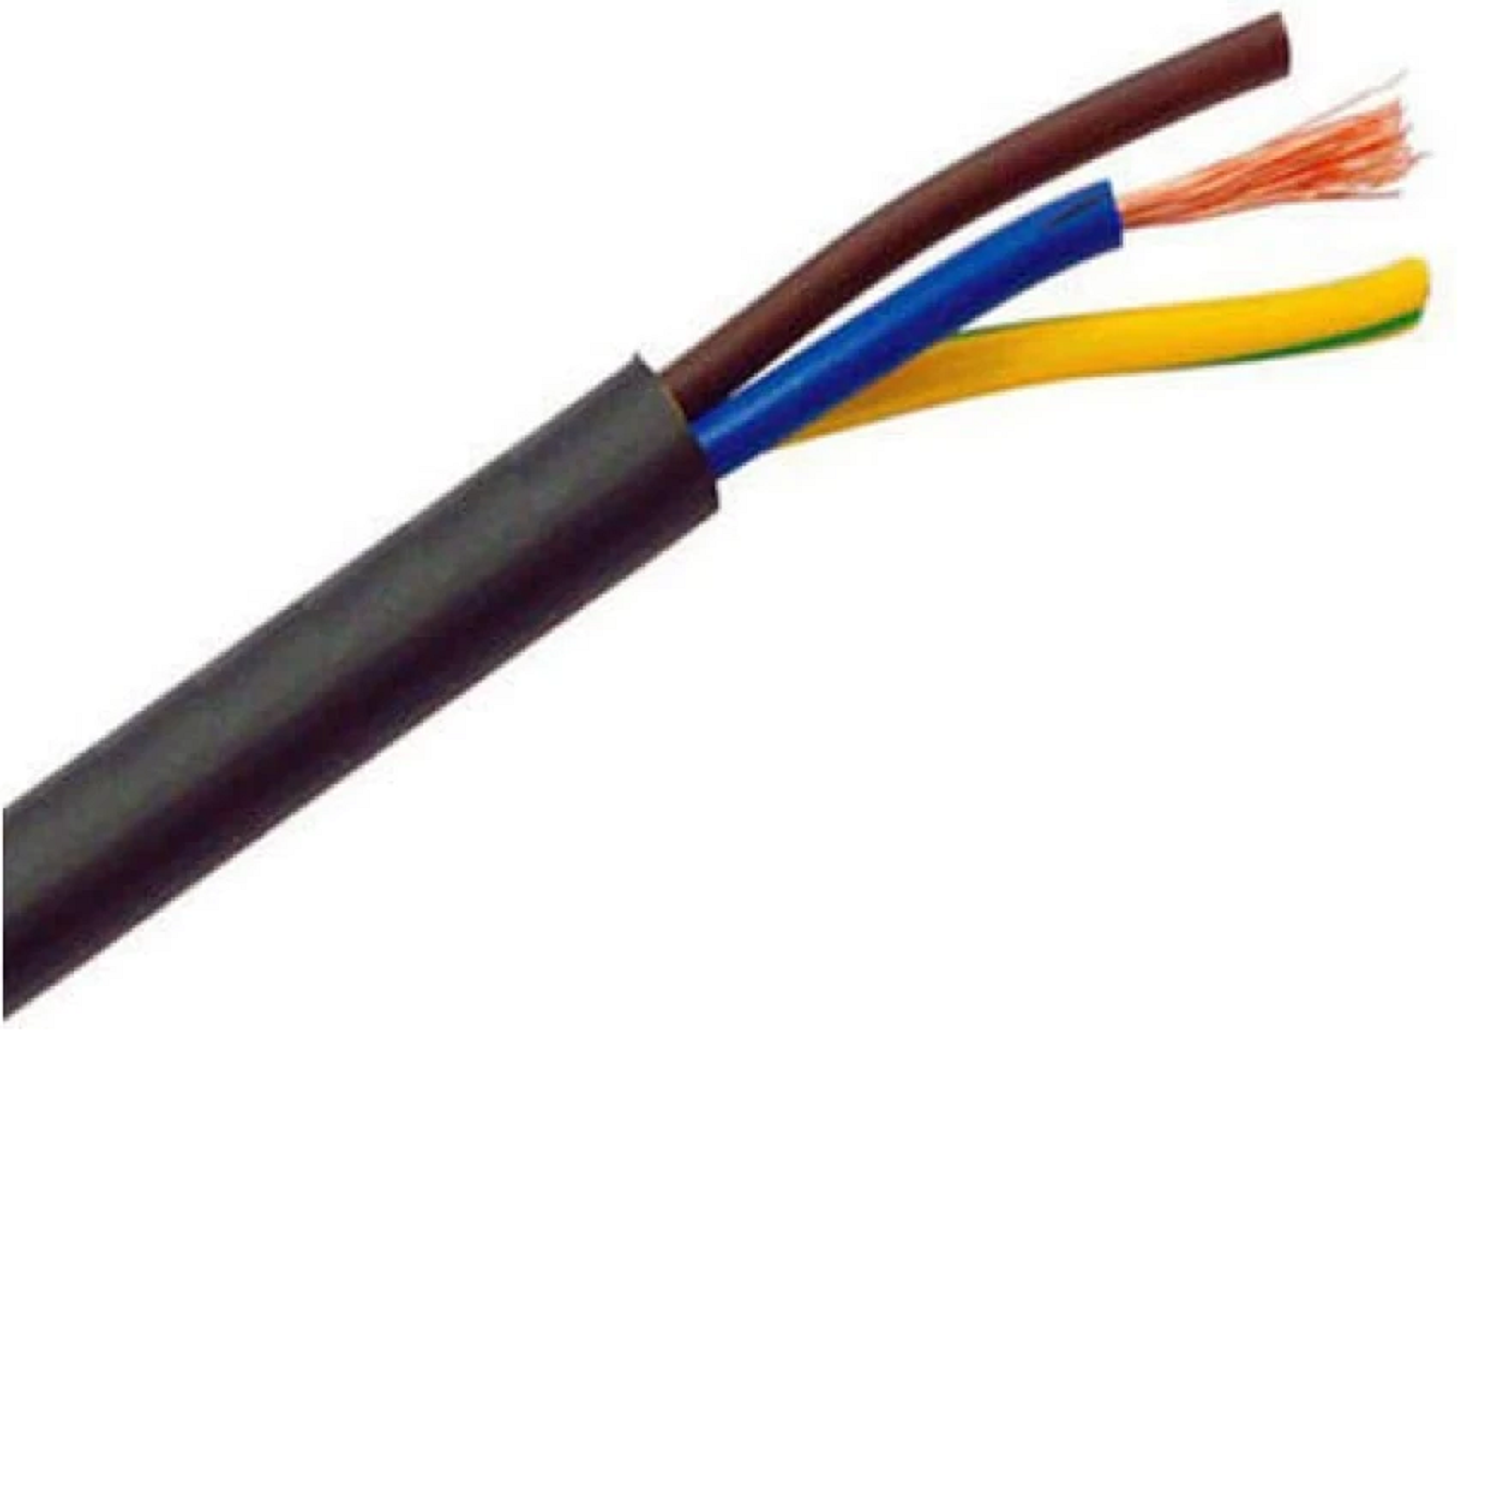 1.5 Sqmm Finolex Copper Flexible Cable With PVC Insulated For Domestic 38 Industrial Uses